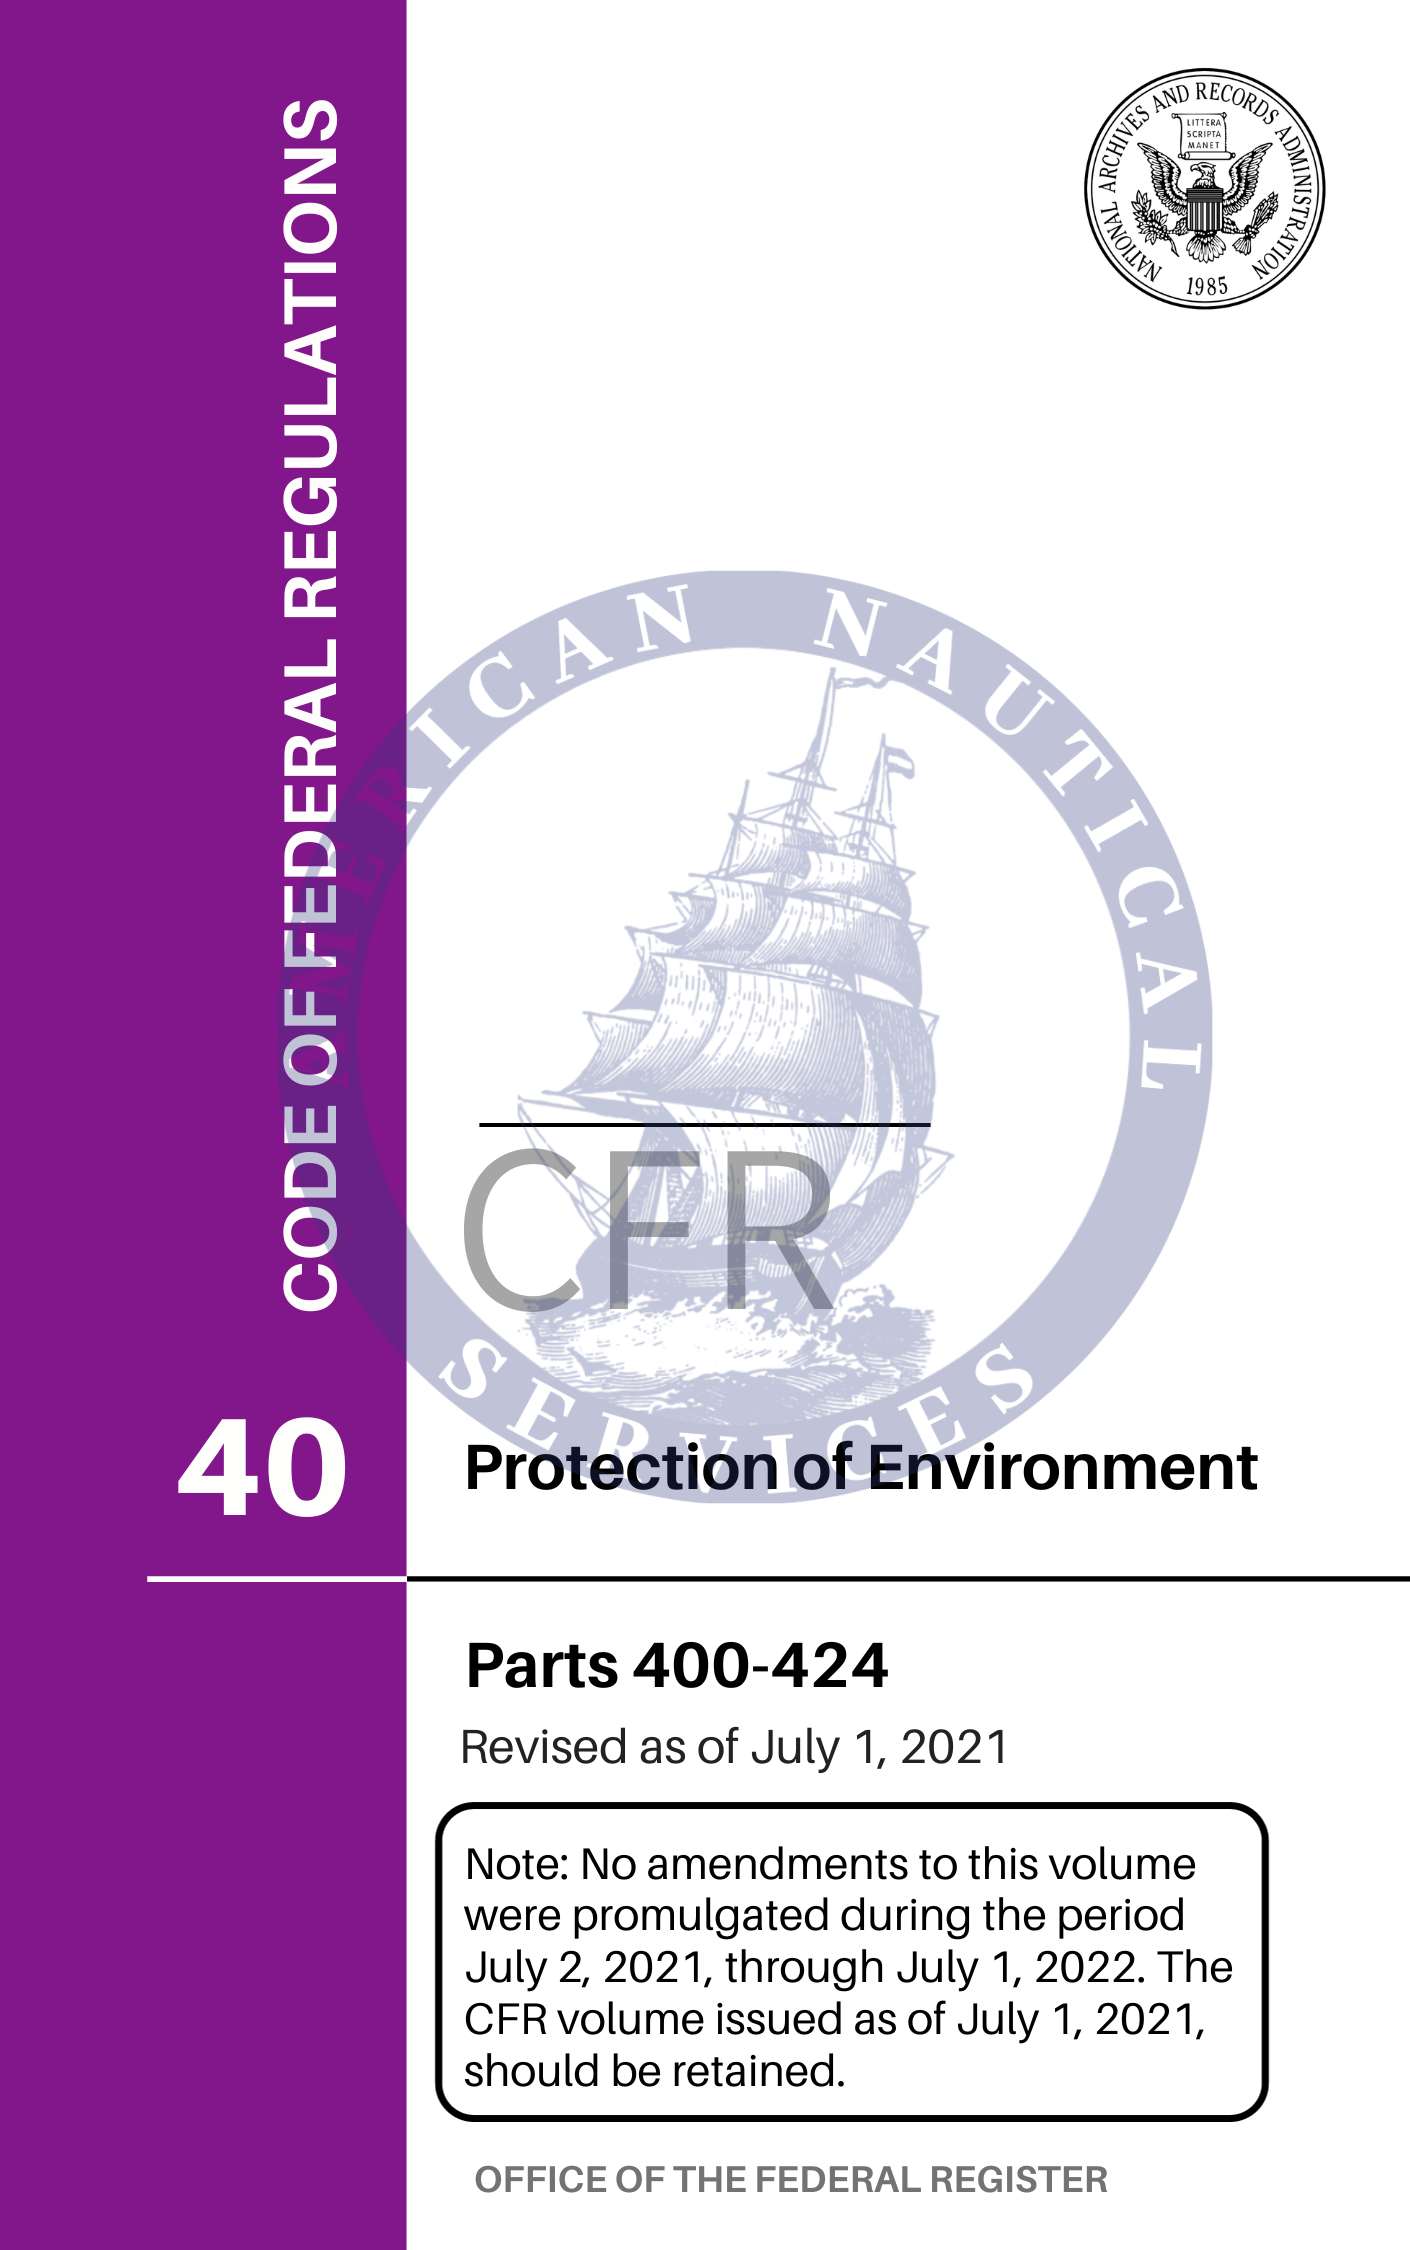 CFR Title 40: Parts 400-424 - Protection of Environment (Code of Federal Regulations), 2022 Edition